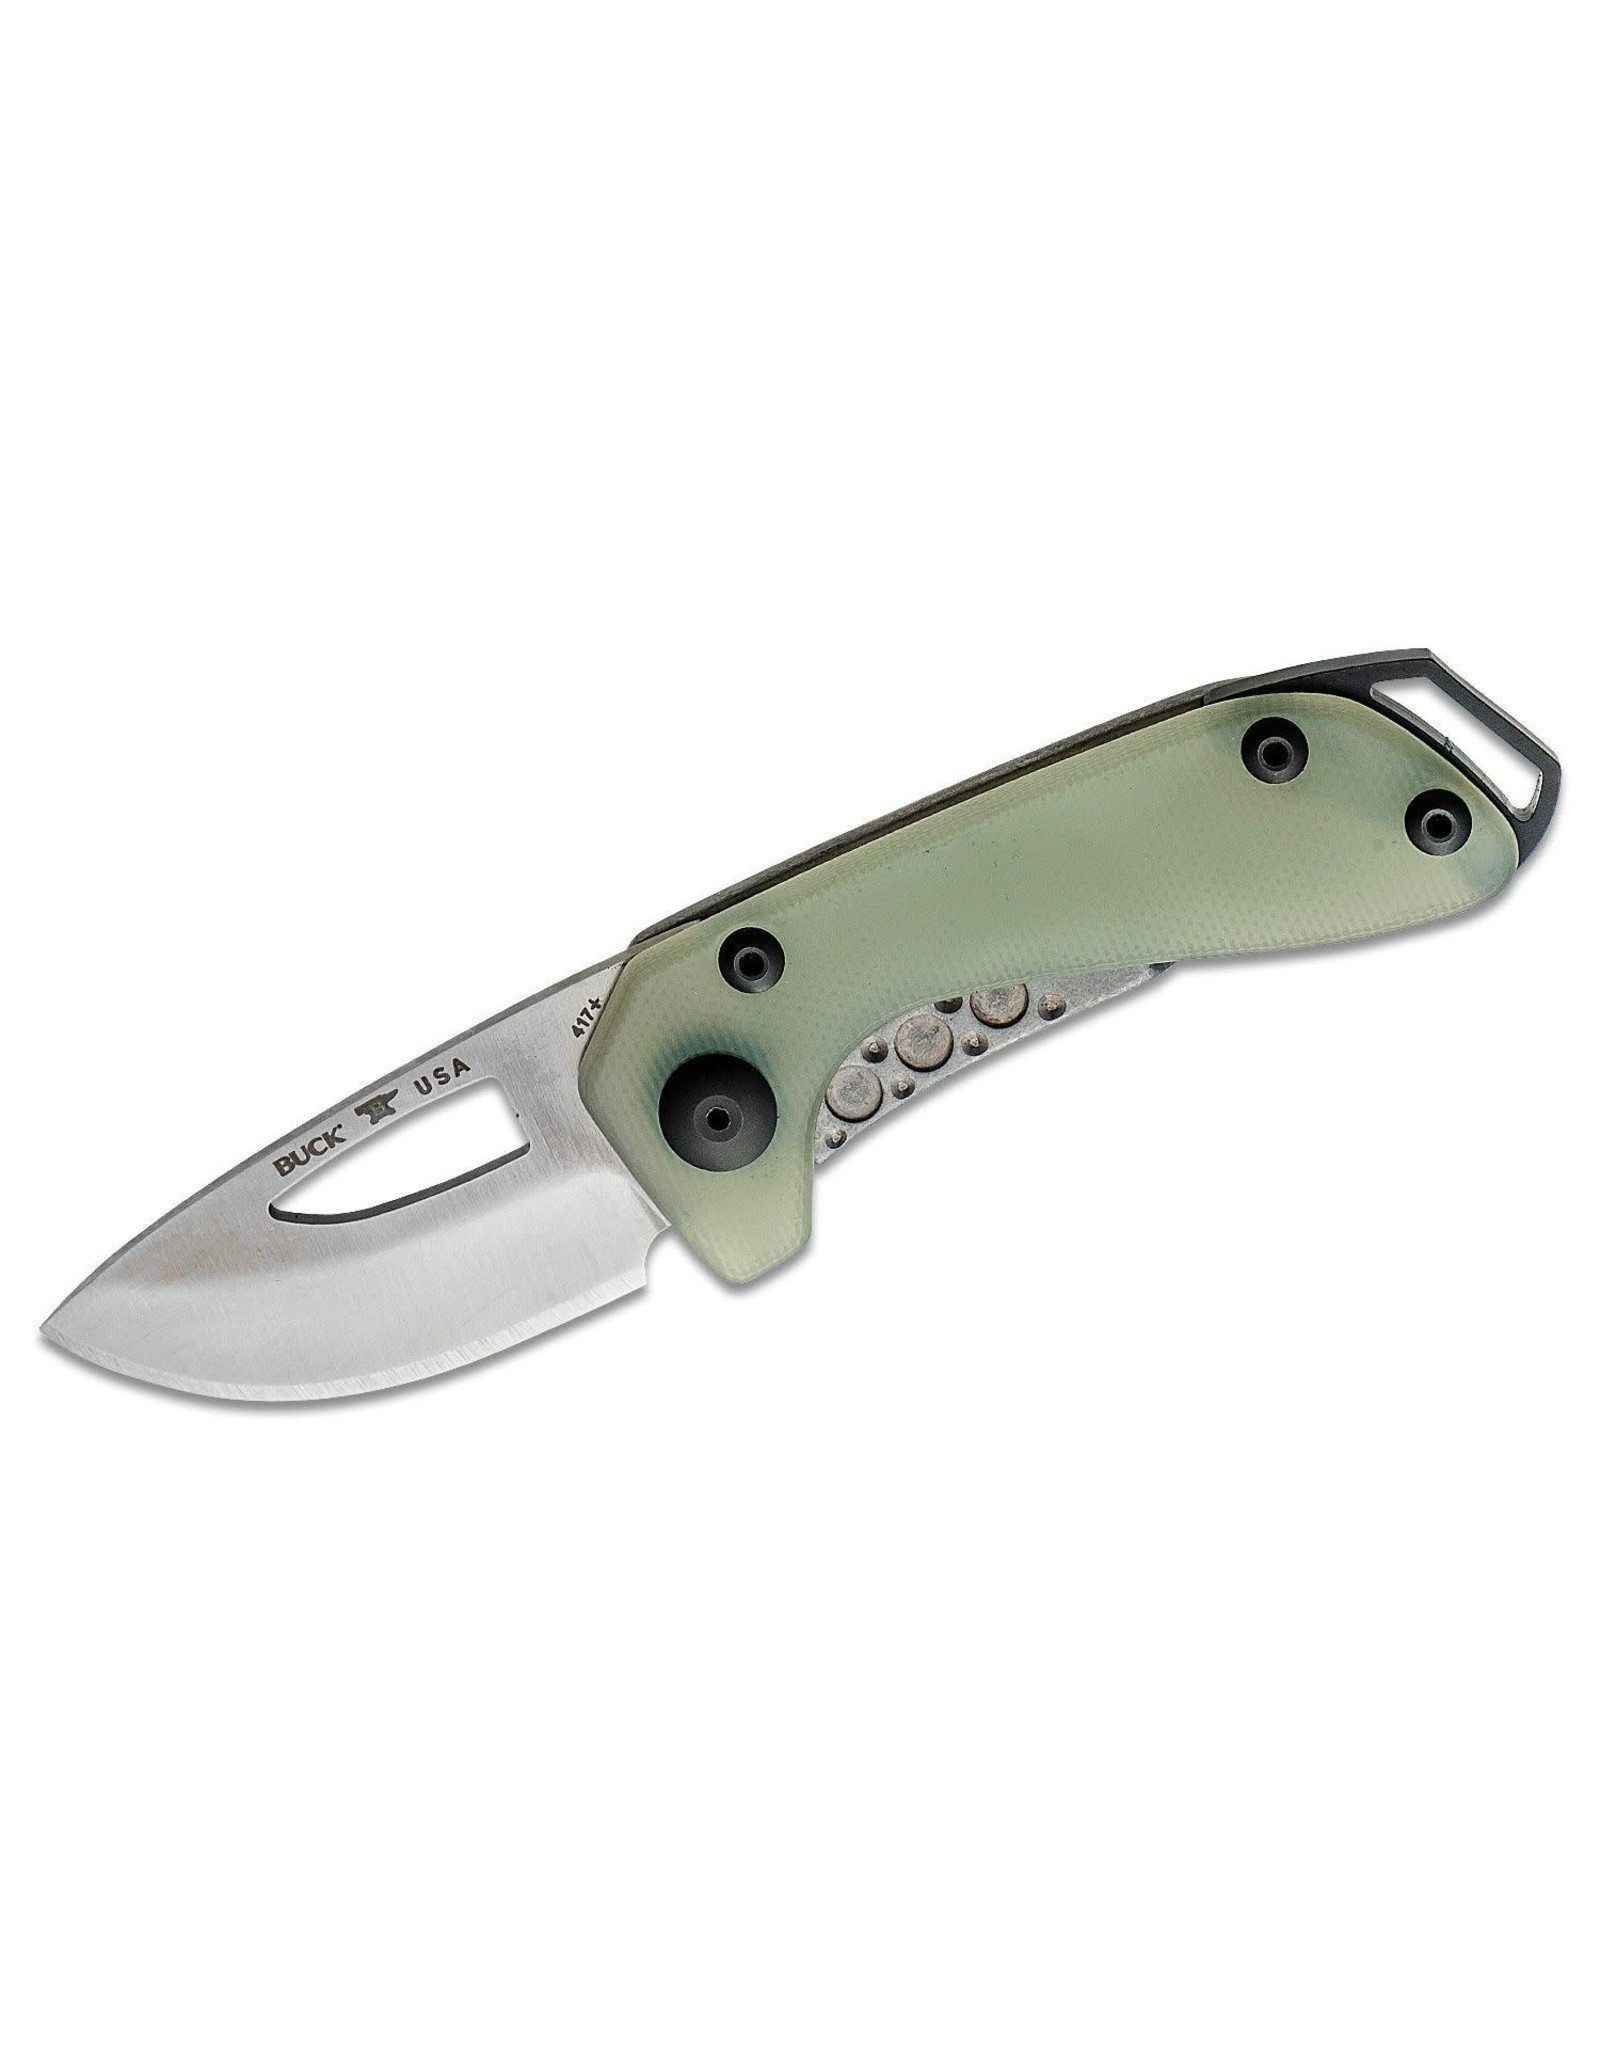 Buck Knives Buck 417 Budgie Compact Folding Knife 2" S35VN Drop Point Plain Blade, Translucent Green (Jade) G10 and Stainless Steel Handles (0417GRS) - 13019